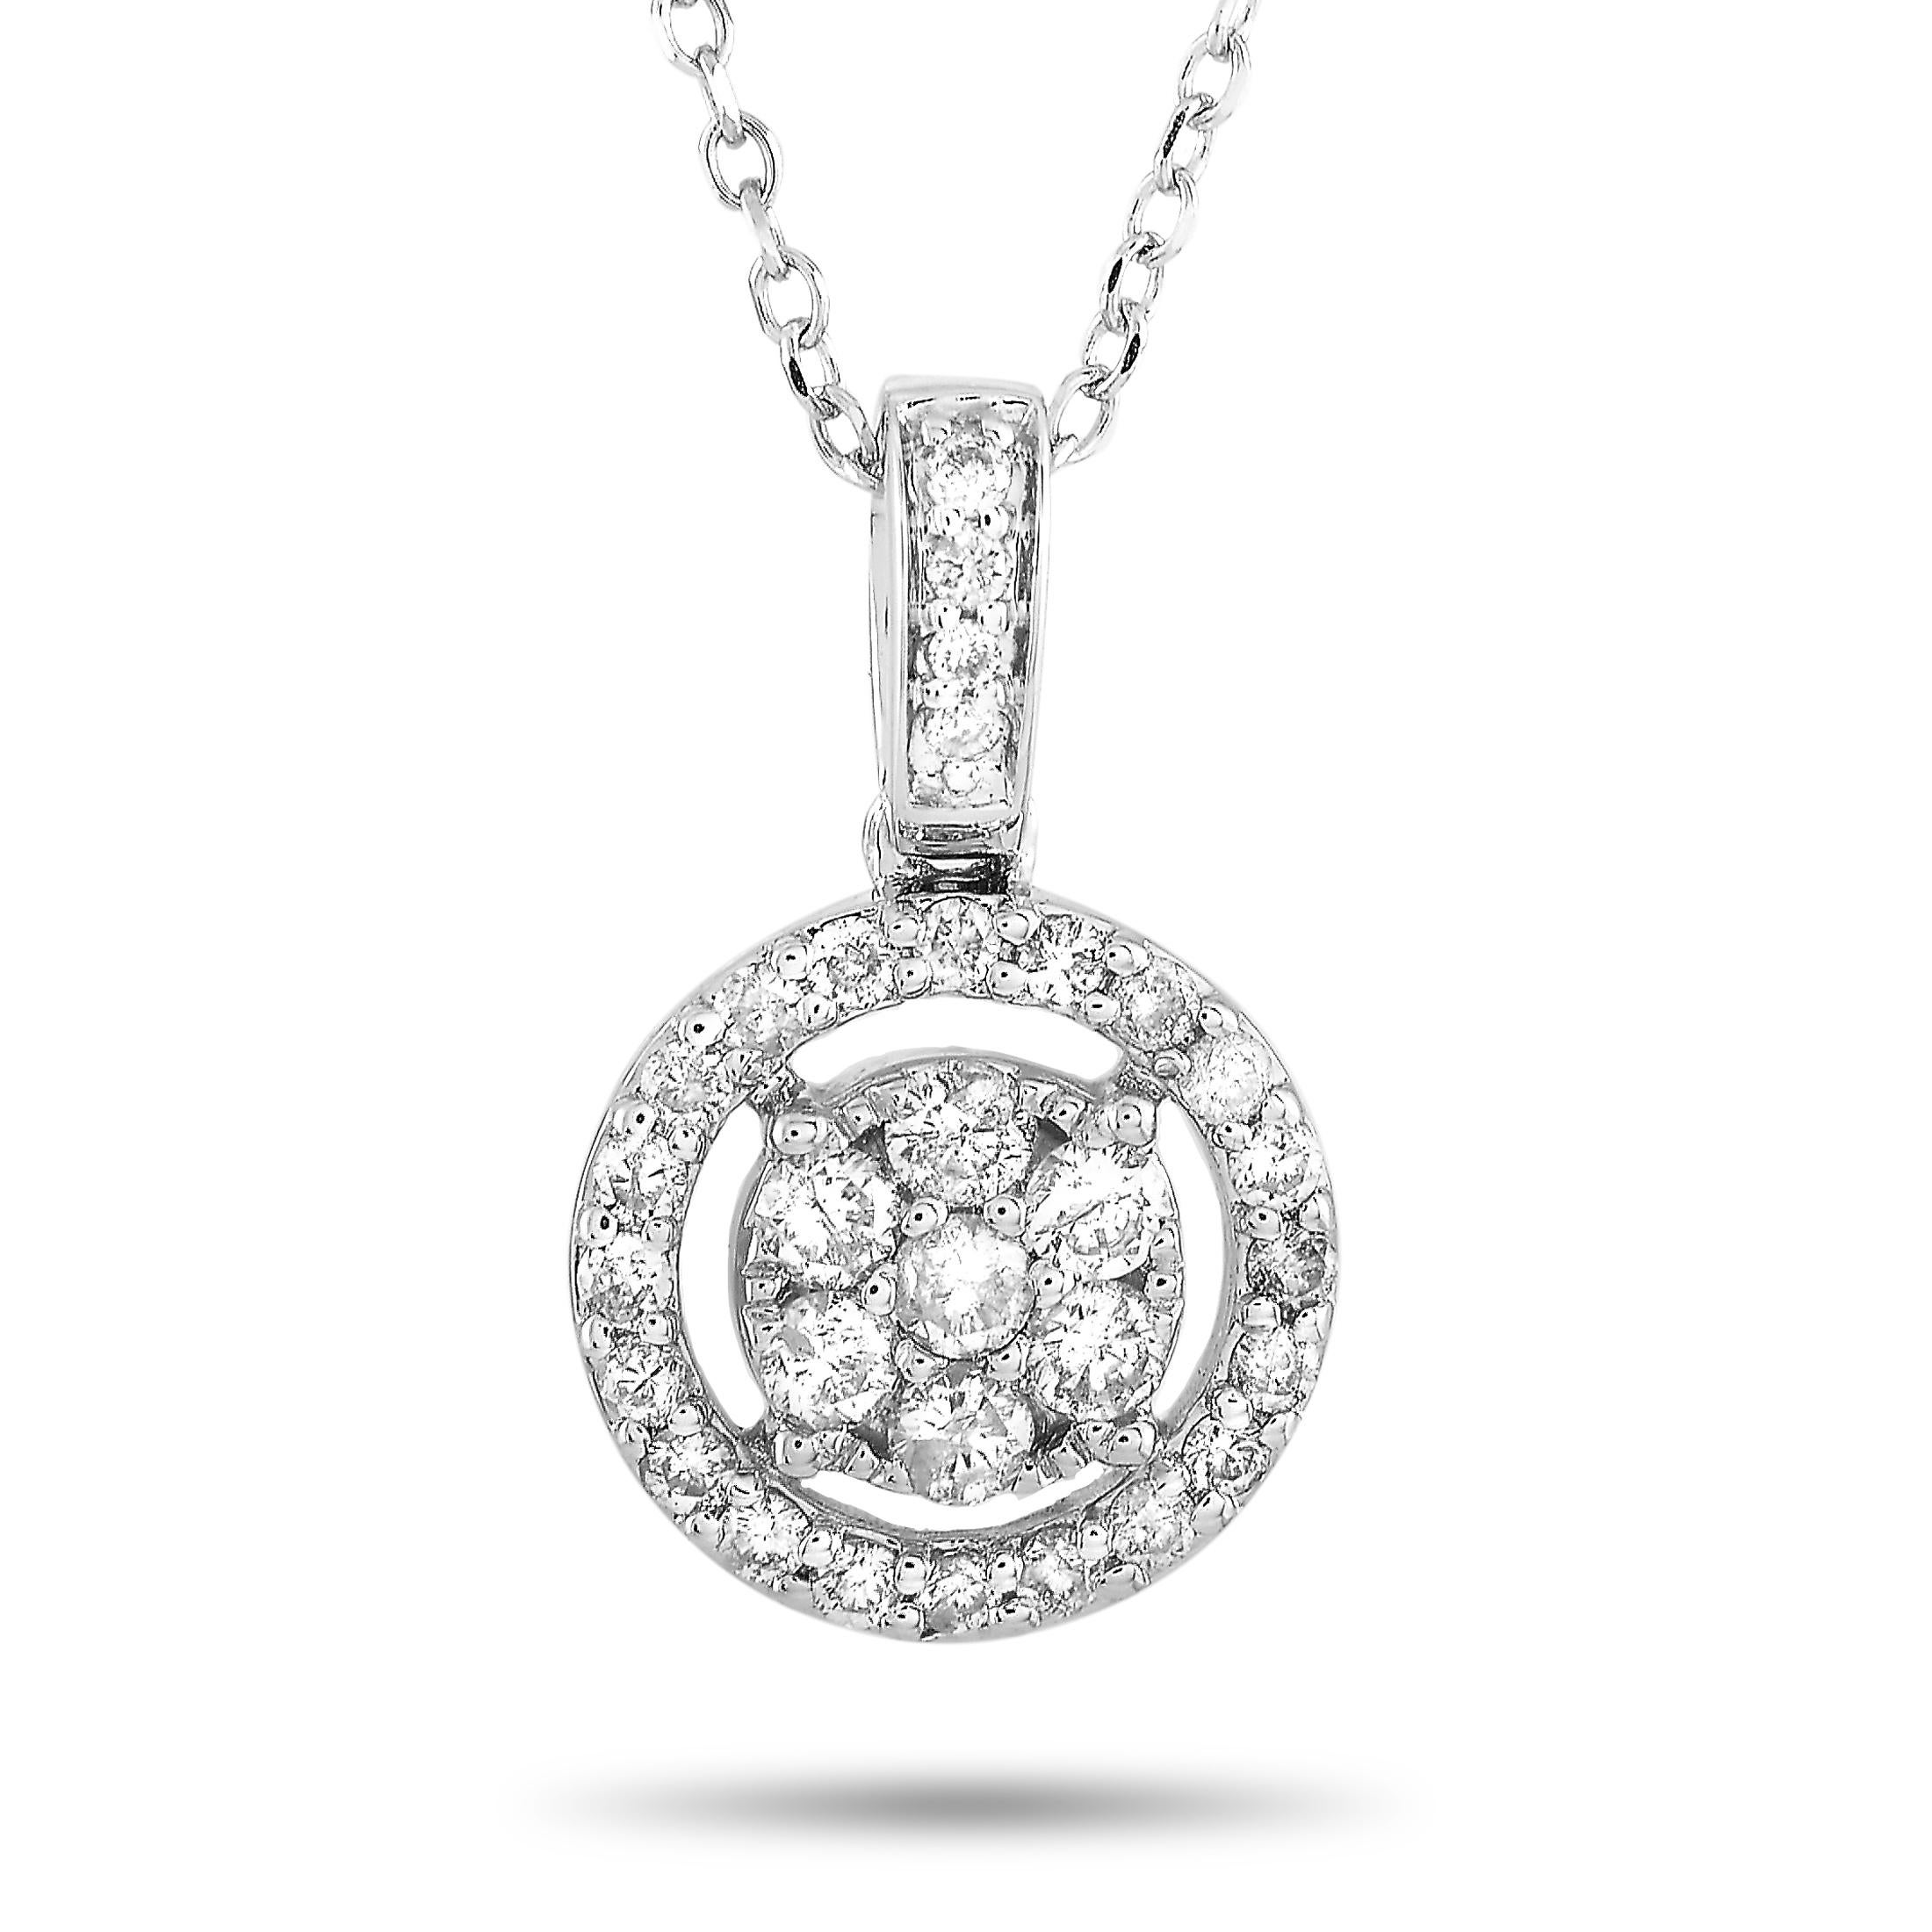 LB Exclusive 14 Karat White Gold 0.25 Carat Diamond Pendant Necklace In New Condition For Sale In Southampton, PA